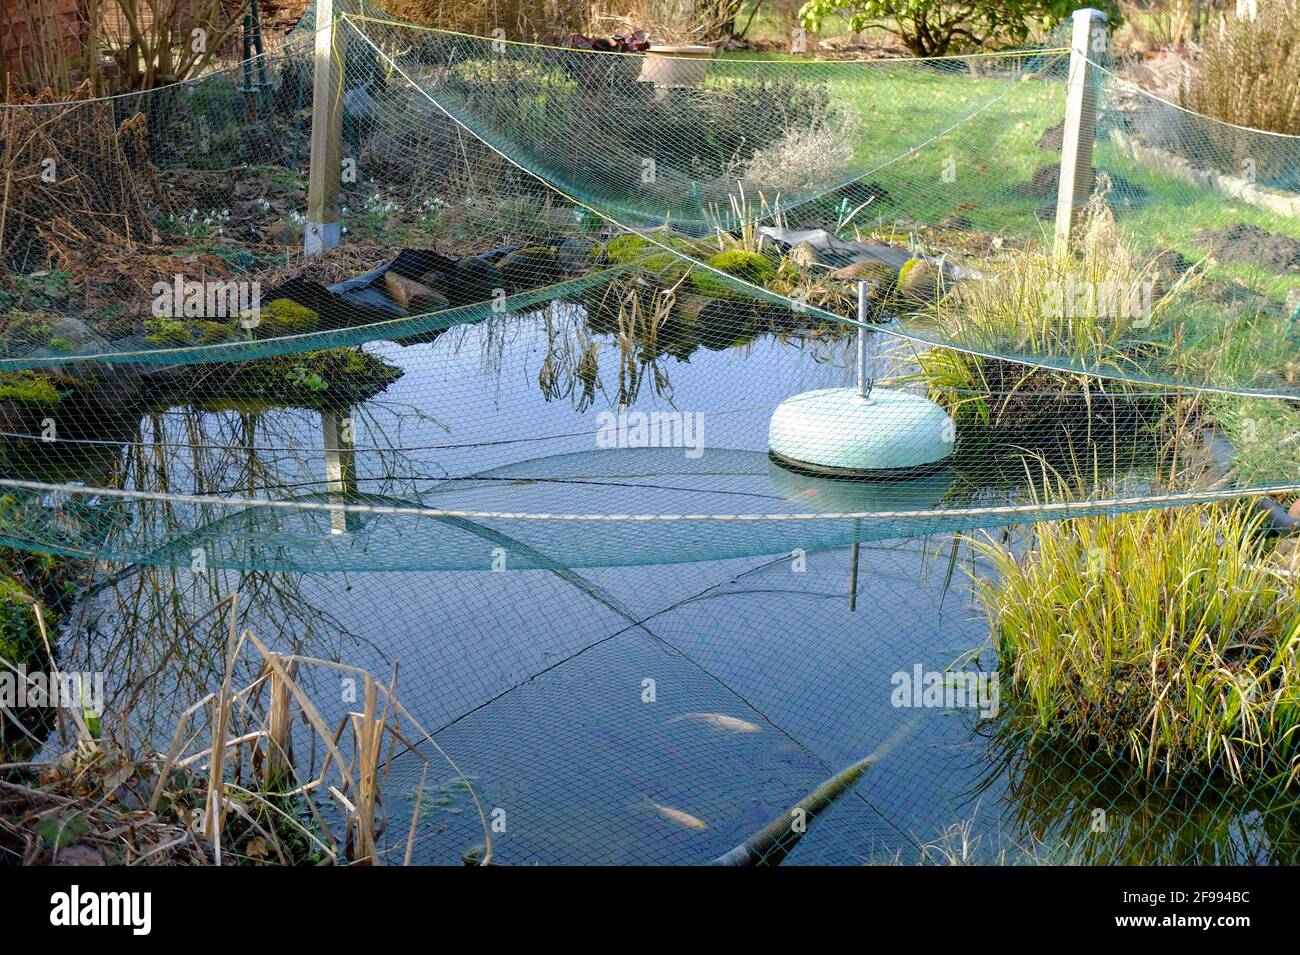 https://c8.alamy.com/comp/2F994BC/garden-pond-with-a-net-as-protection-from-autumn-leaves-2F994BC.jpg